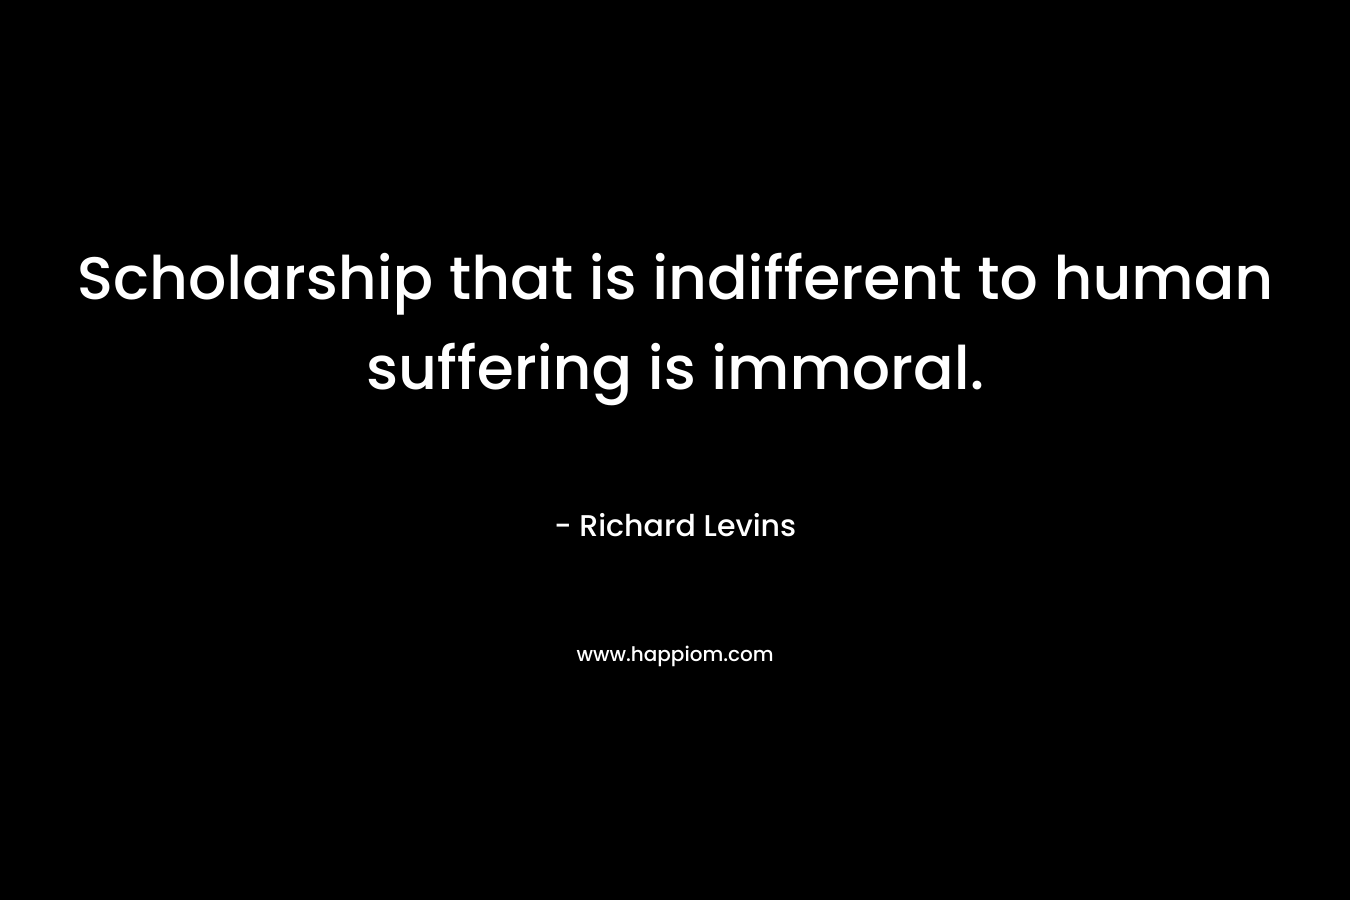 Scholarship that is indifferent to human suffering is immoral.